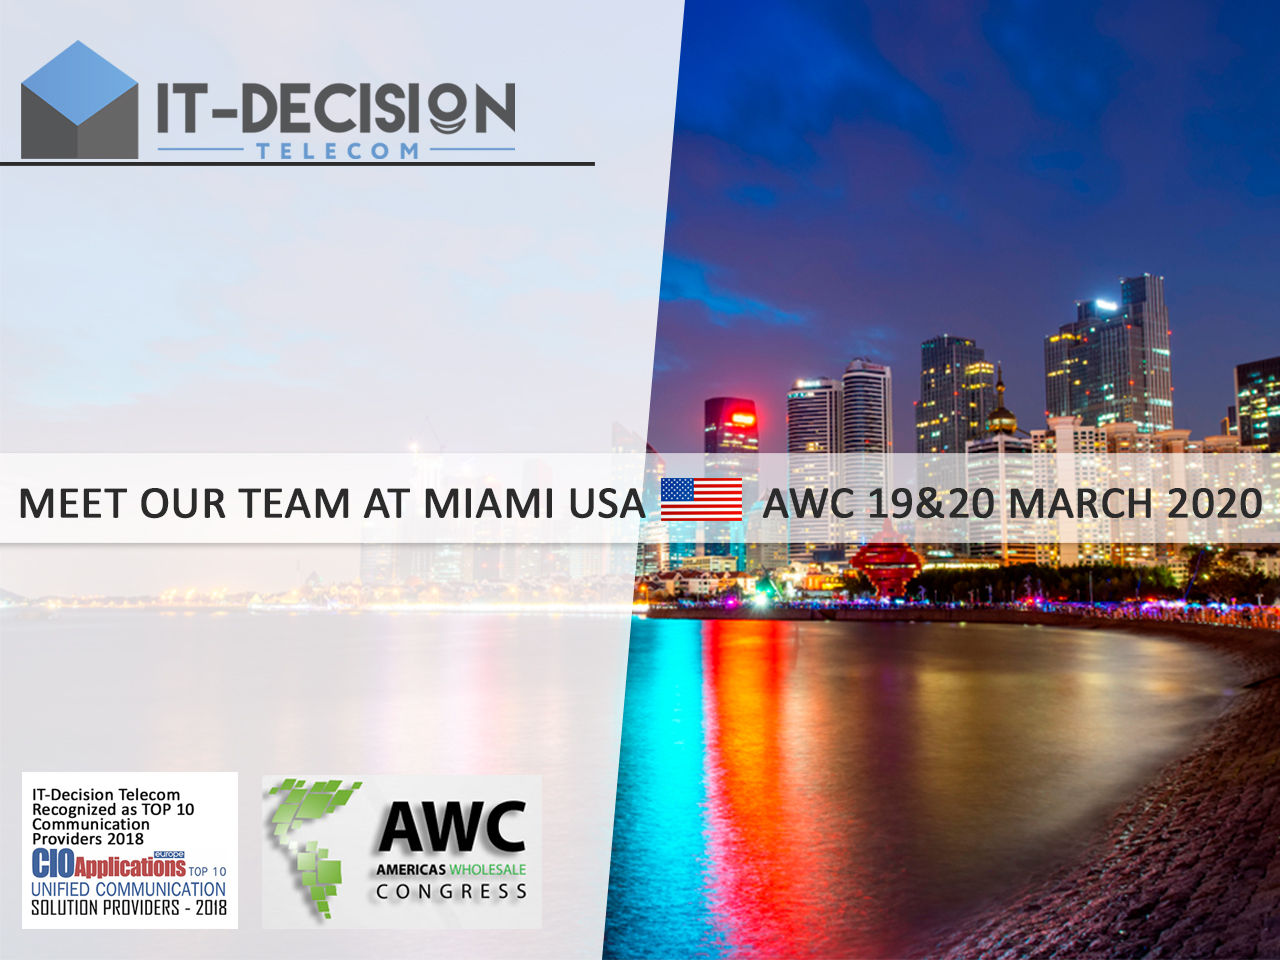 ITD Telecom is the Sponsor of AWC 2020 in Miami!